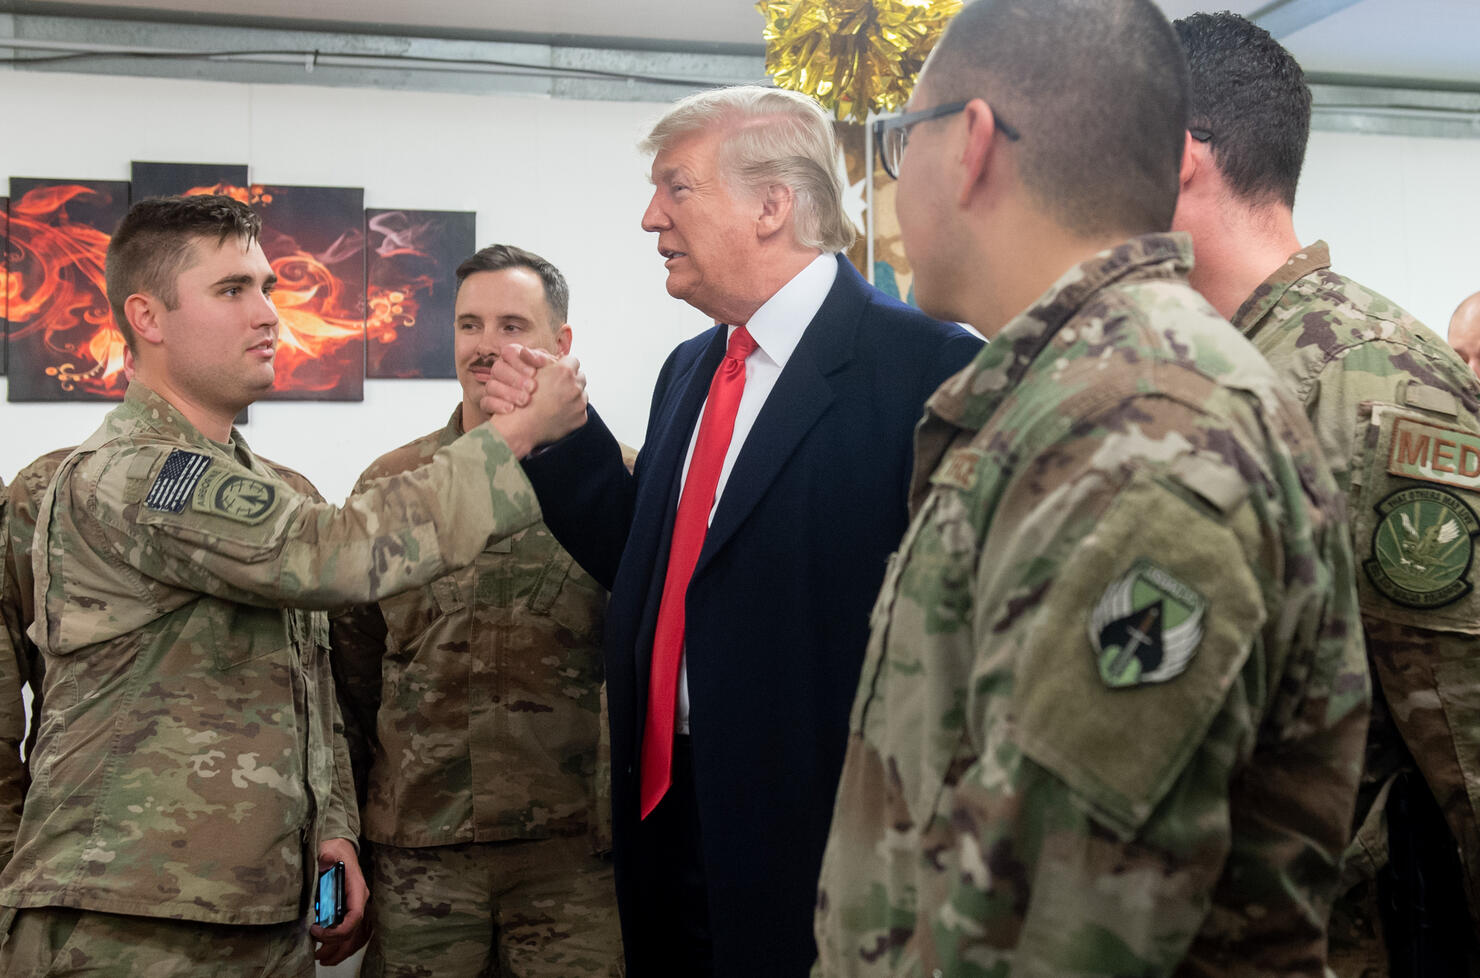 President Trump makes surprise visit to troops in Iraq